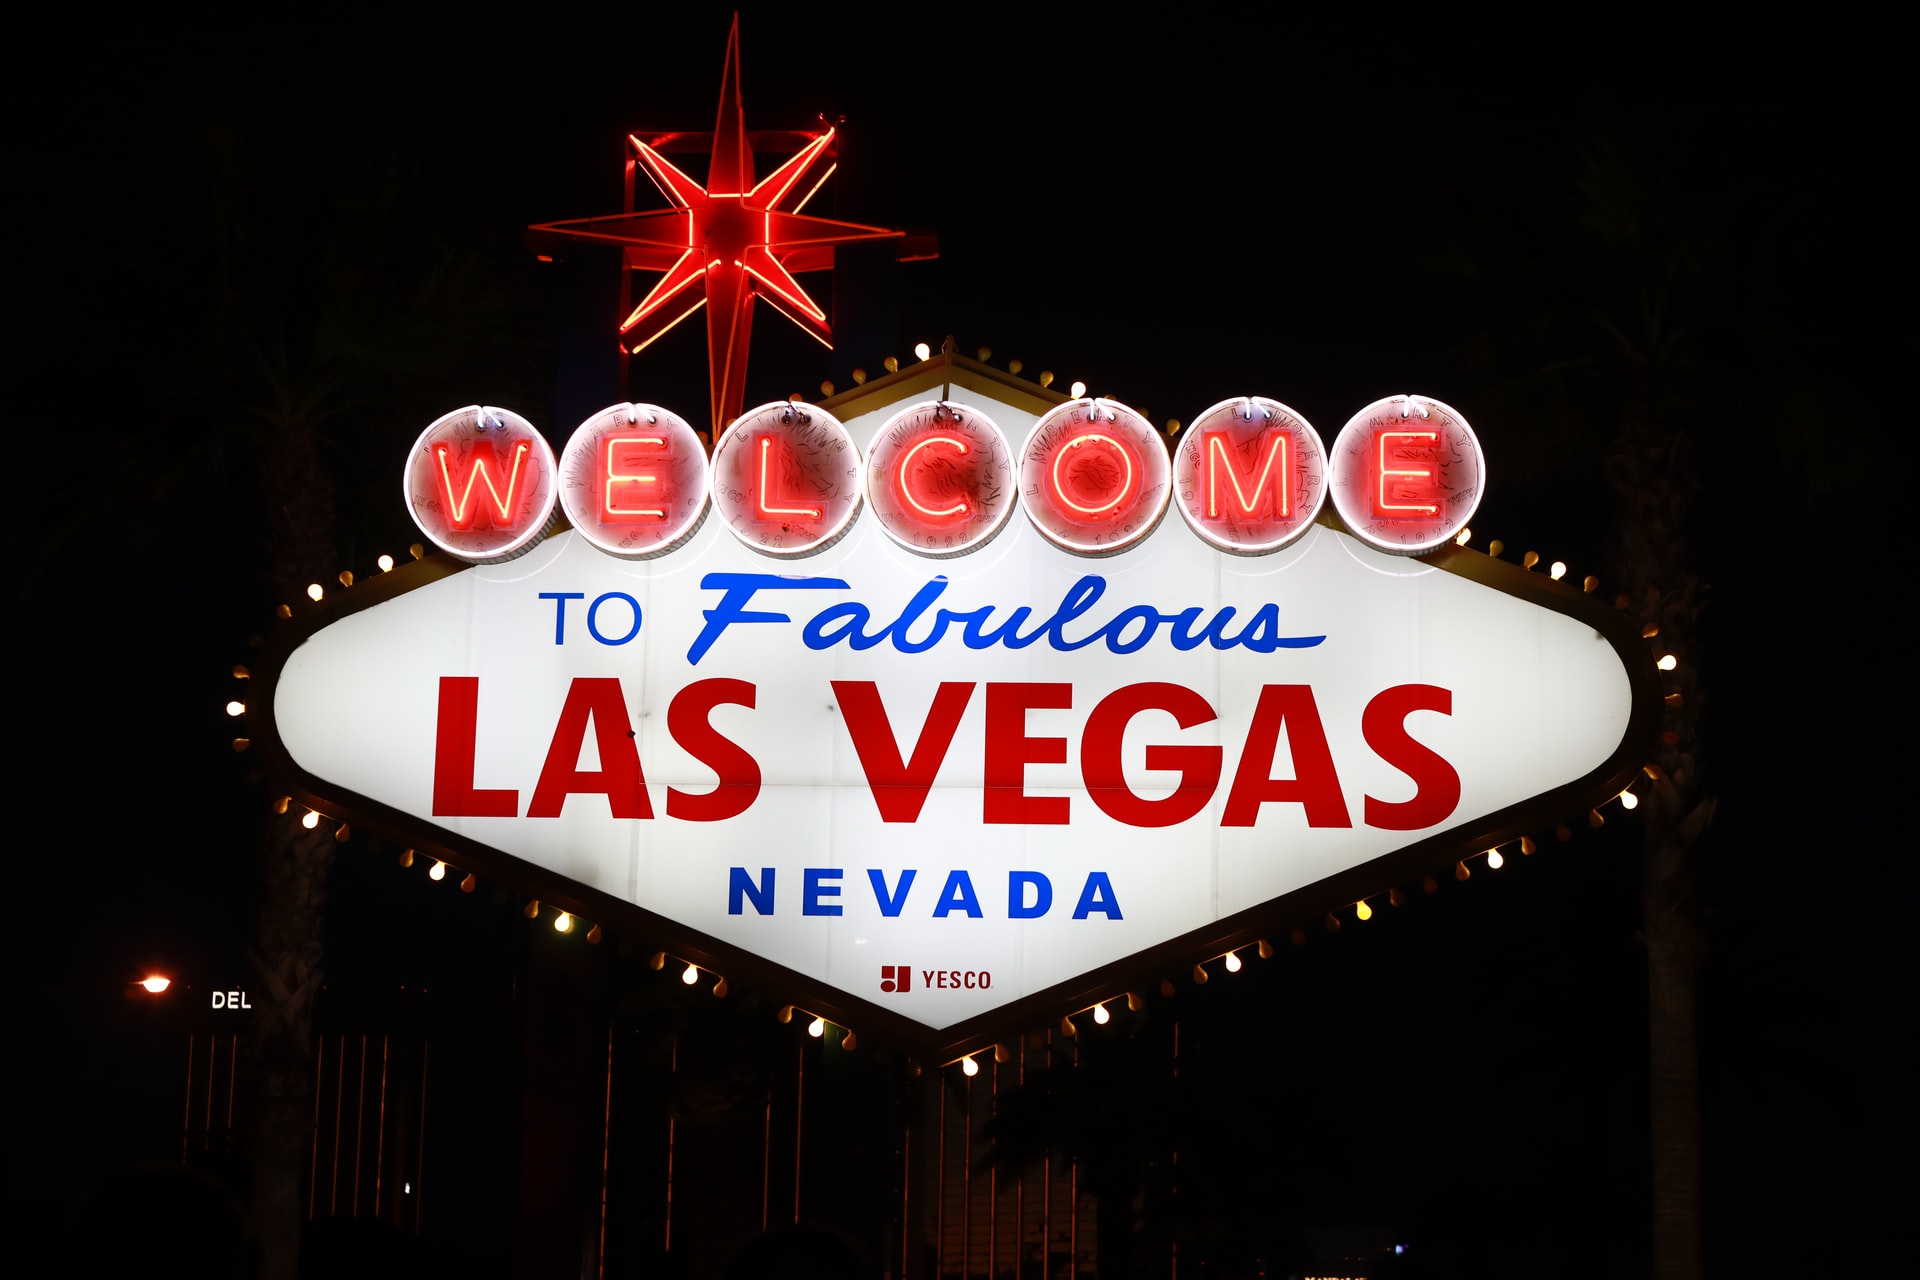 Lights out: how the pandemic has changed Las Vegas - theentertainment.vision